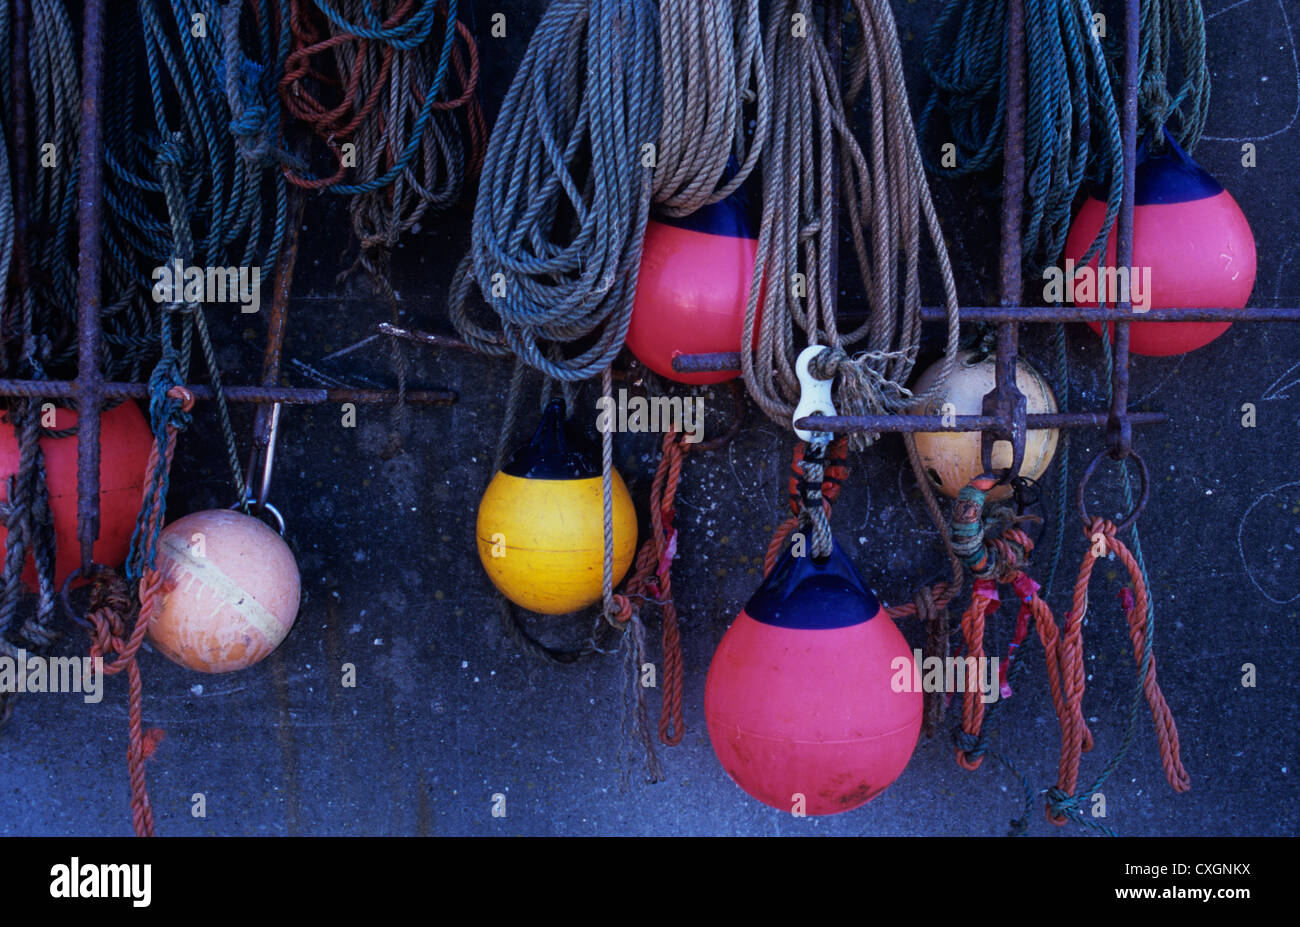 Fishing boat ropes and floats or marker buoys hanging neatly to dry against concrete wall Stock Photo